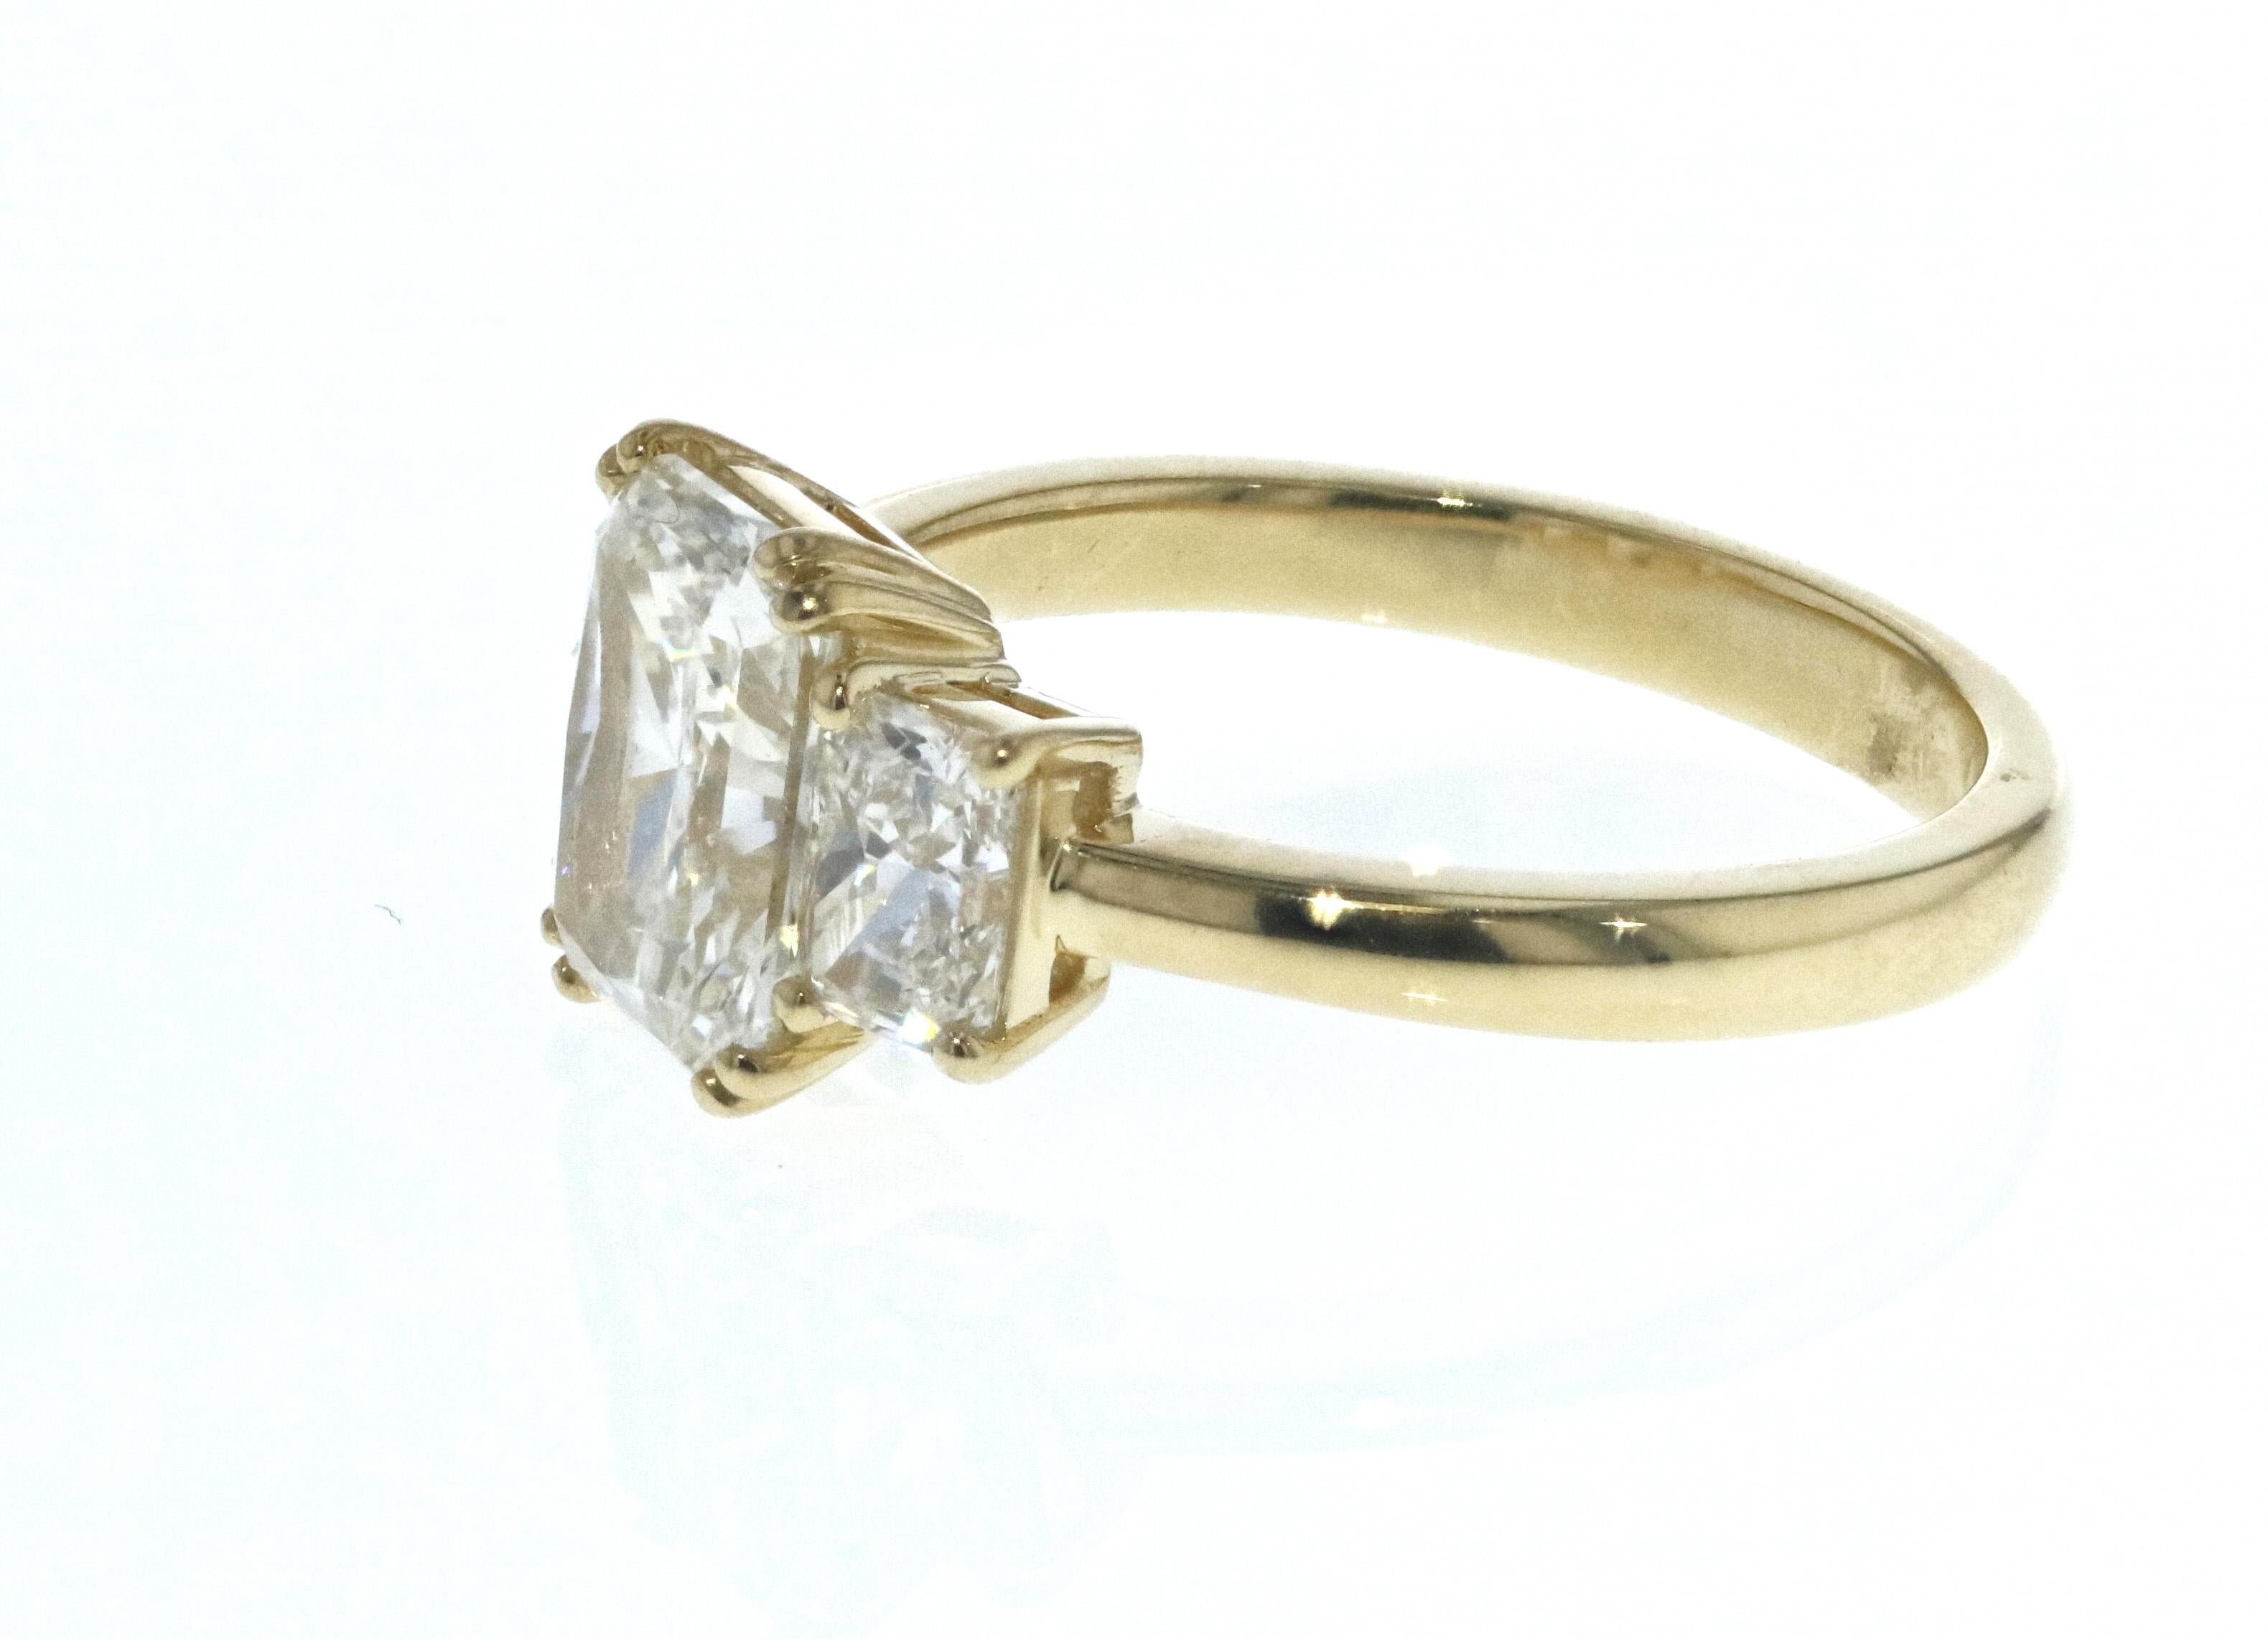 This diamond ring is crafted in 18k yellow gold, contains a Radiant Cut Diamond (1.53 total carat weight, G color, VS2 clarity,  surrounded by 2 matching Radiant Cut Diamonds (0.67 total carat weight, G color, VS clarity). With a raised profile and